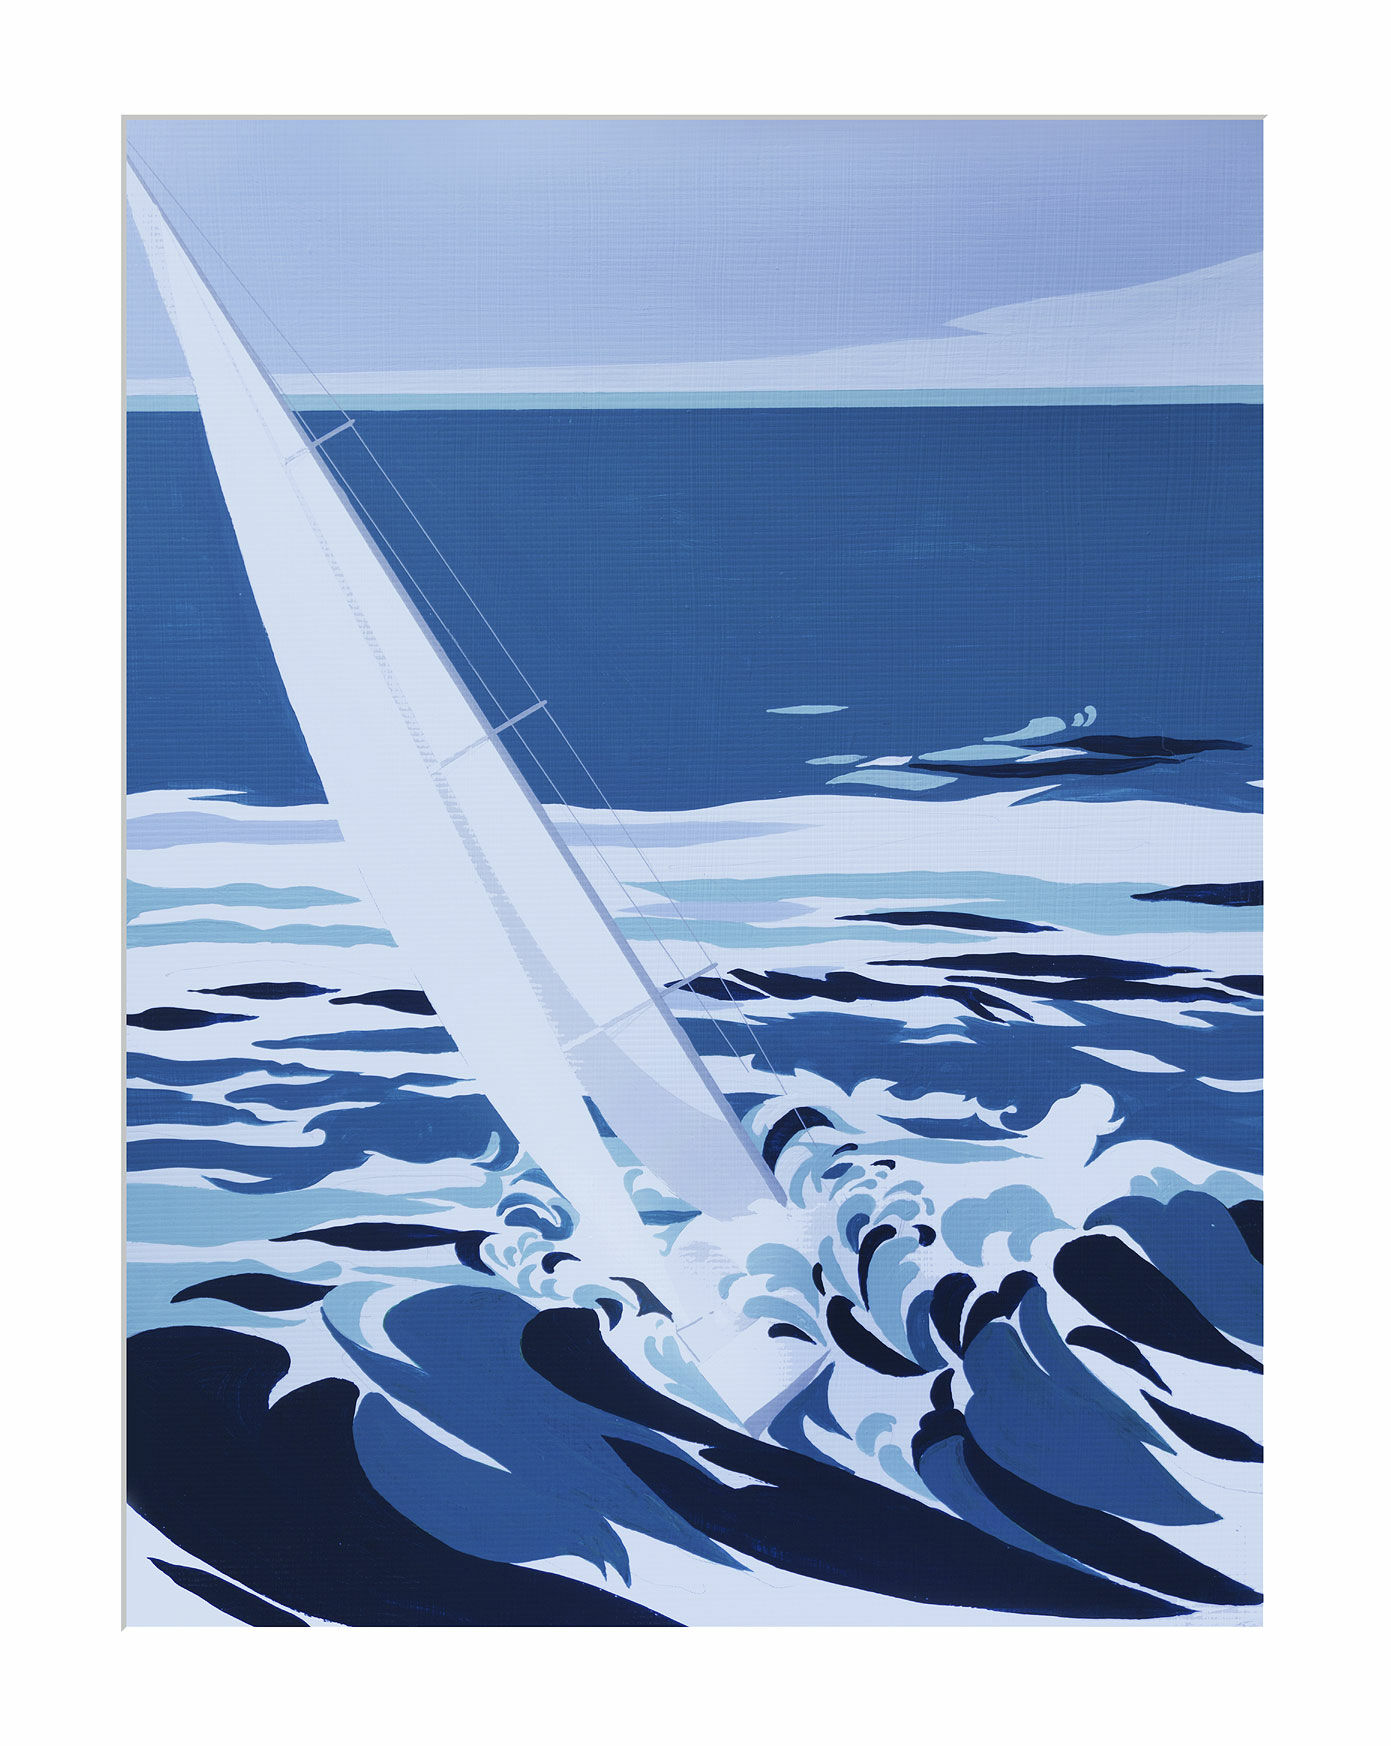 Picture "Sail I", unframed by Alf Bartels